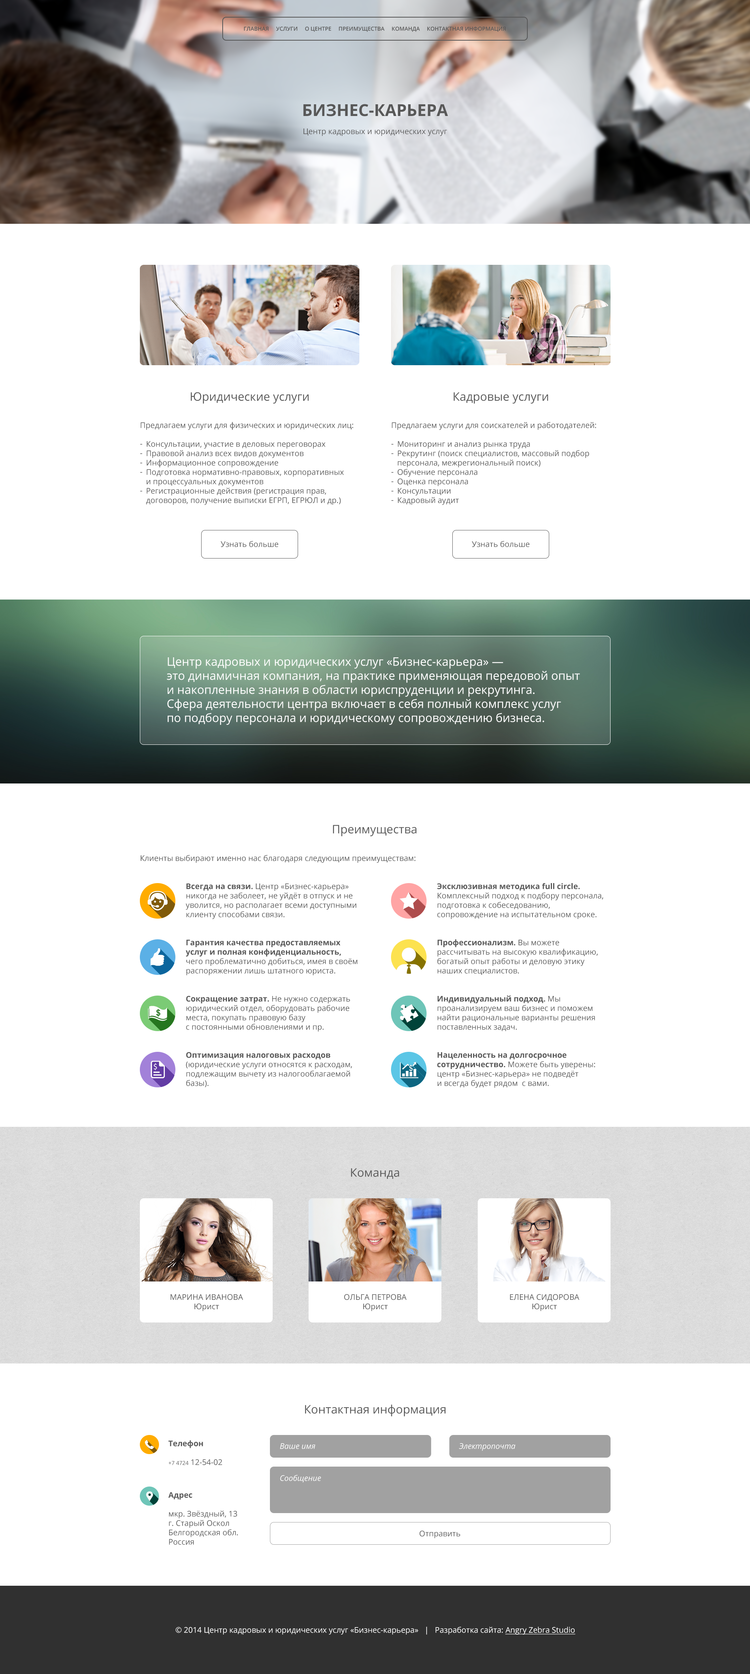 Business-Career - Main page layout